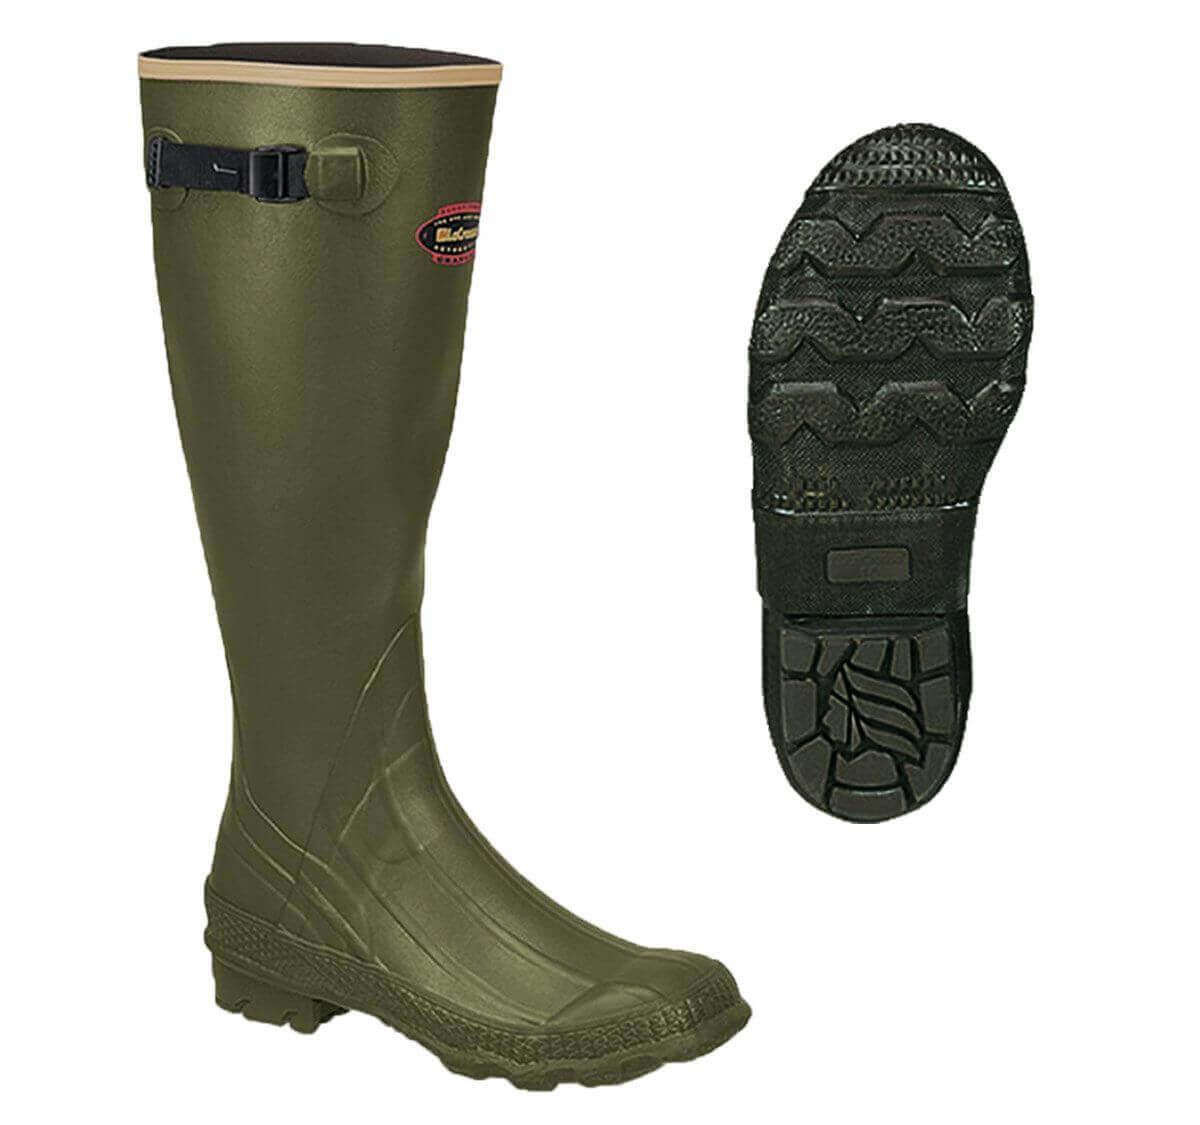 BRUSH BUSTER FROGLEGS CORDURA WITH LACROSSE GRANGE BOOT NON-INSULATED